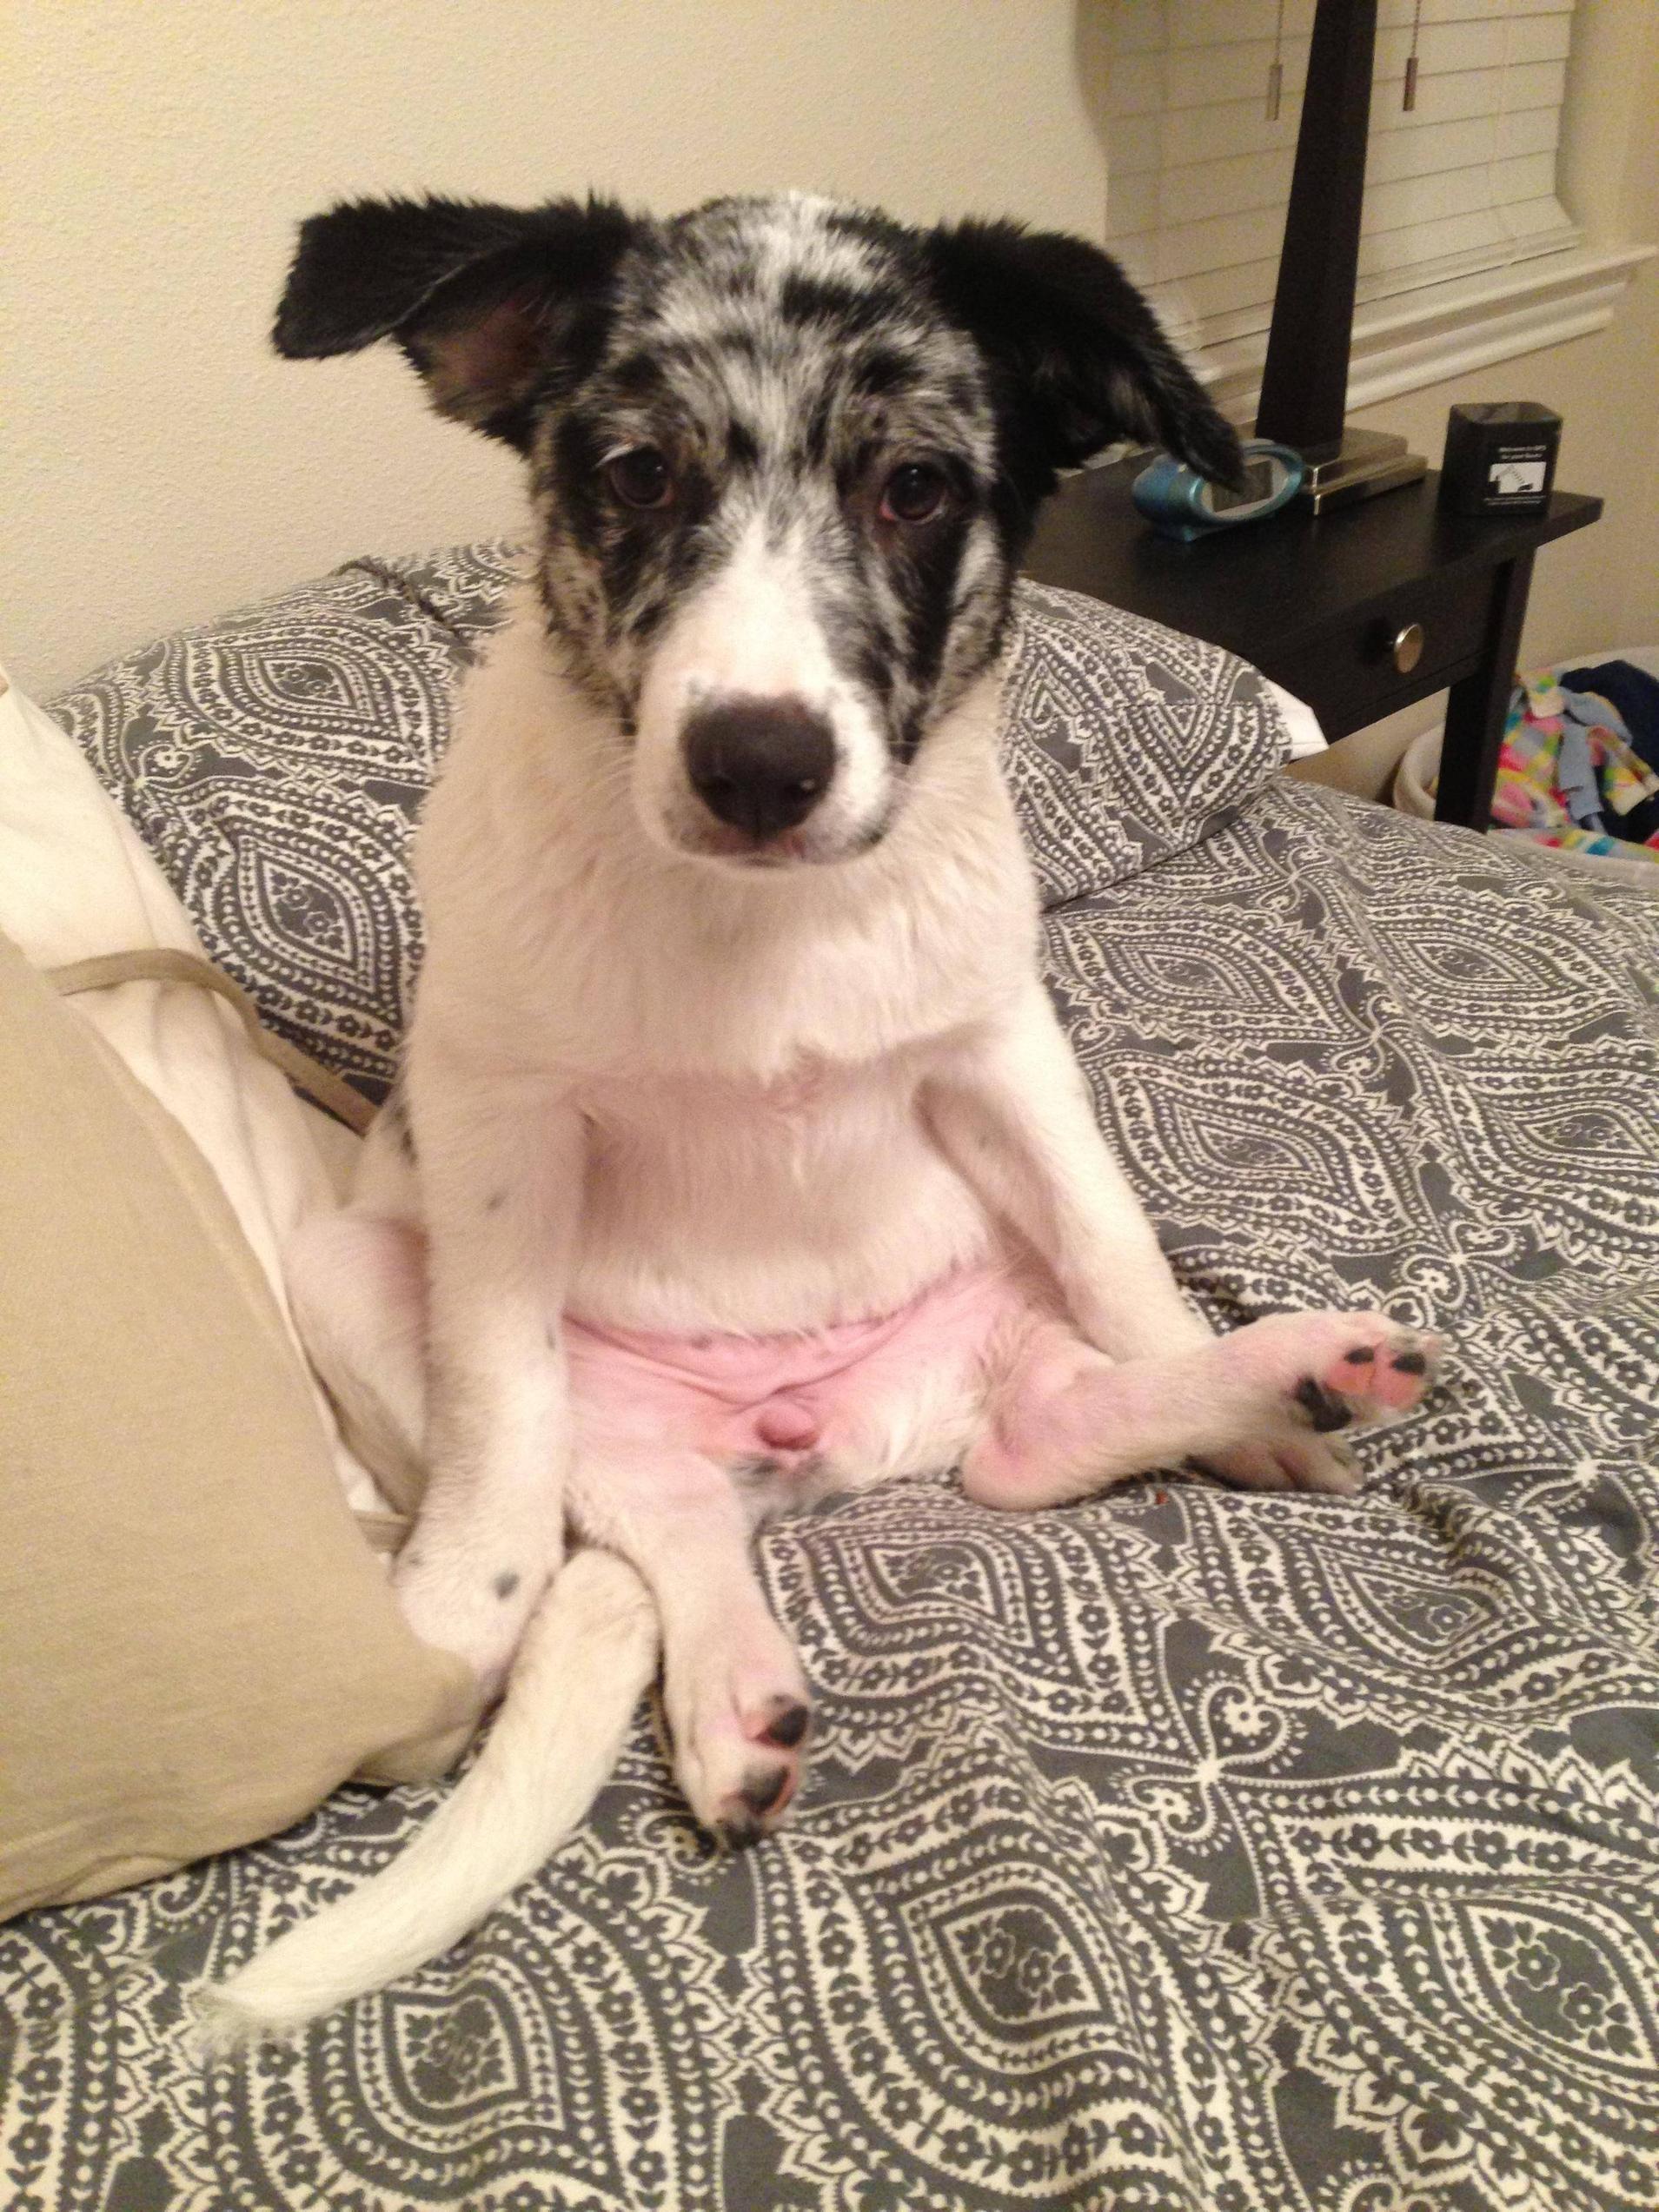 Ripley was found in a field, taken in by her finder, and is now being schooled on how to sit like a lady.